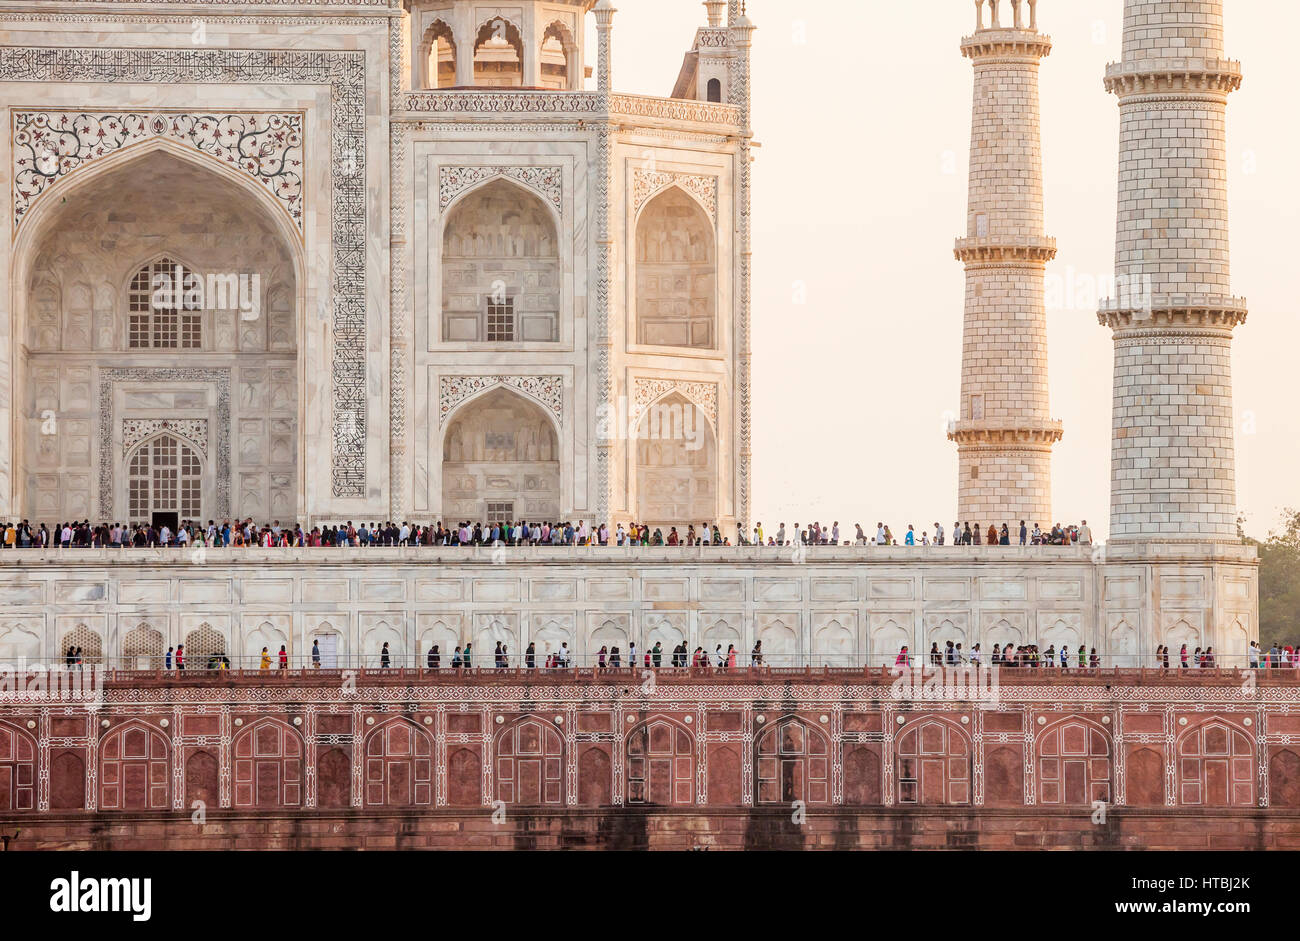 A portion of the Taj Mahal on a Friday afternoon when the site is closed to the public but open for worshipers, Agra, India. Stock Photo